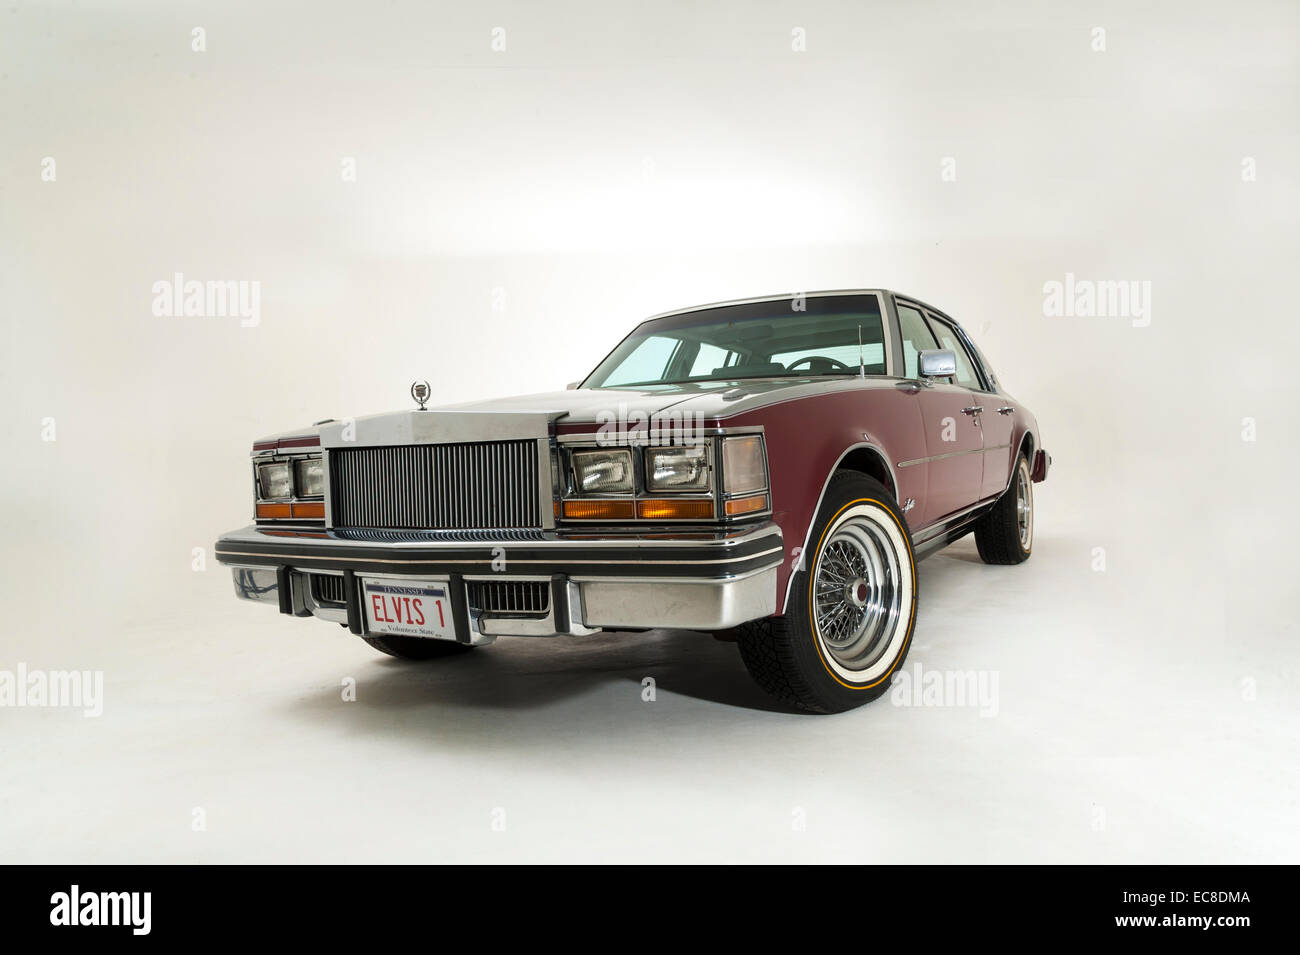 1976 Cadillac Seville owned by Elvis Presley Stock Photo